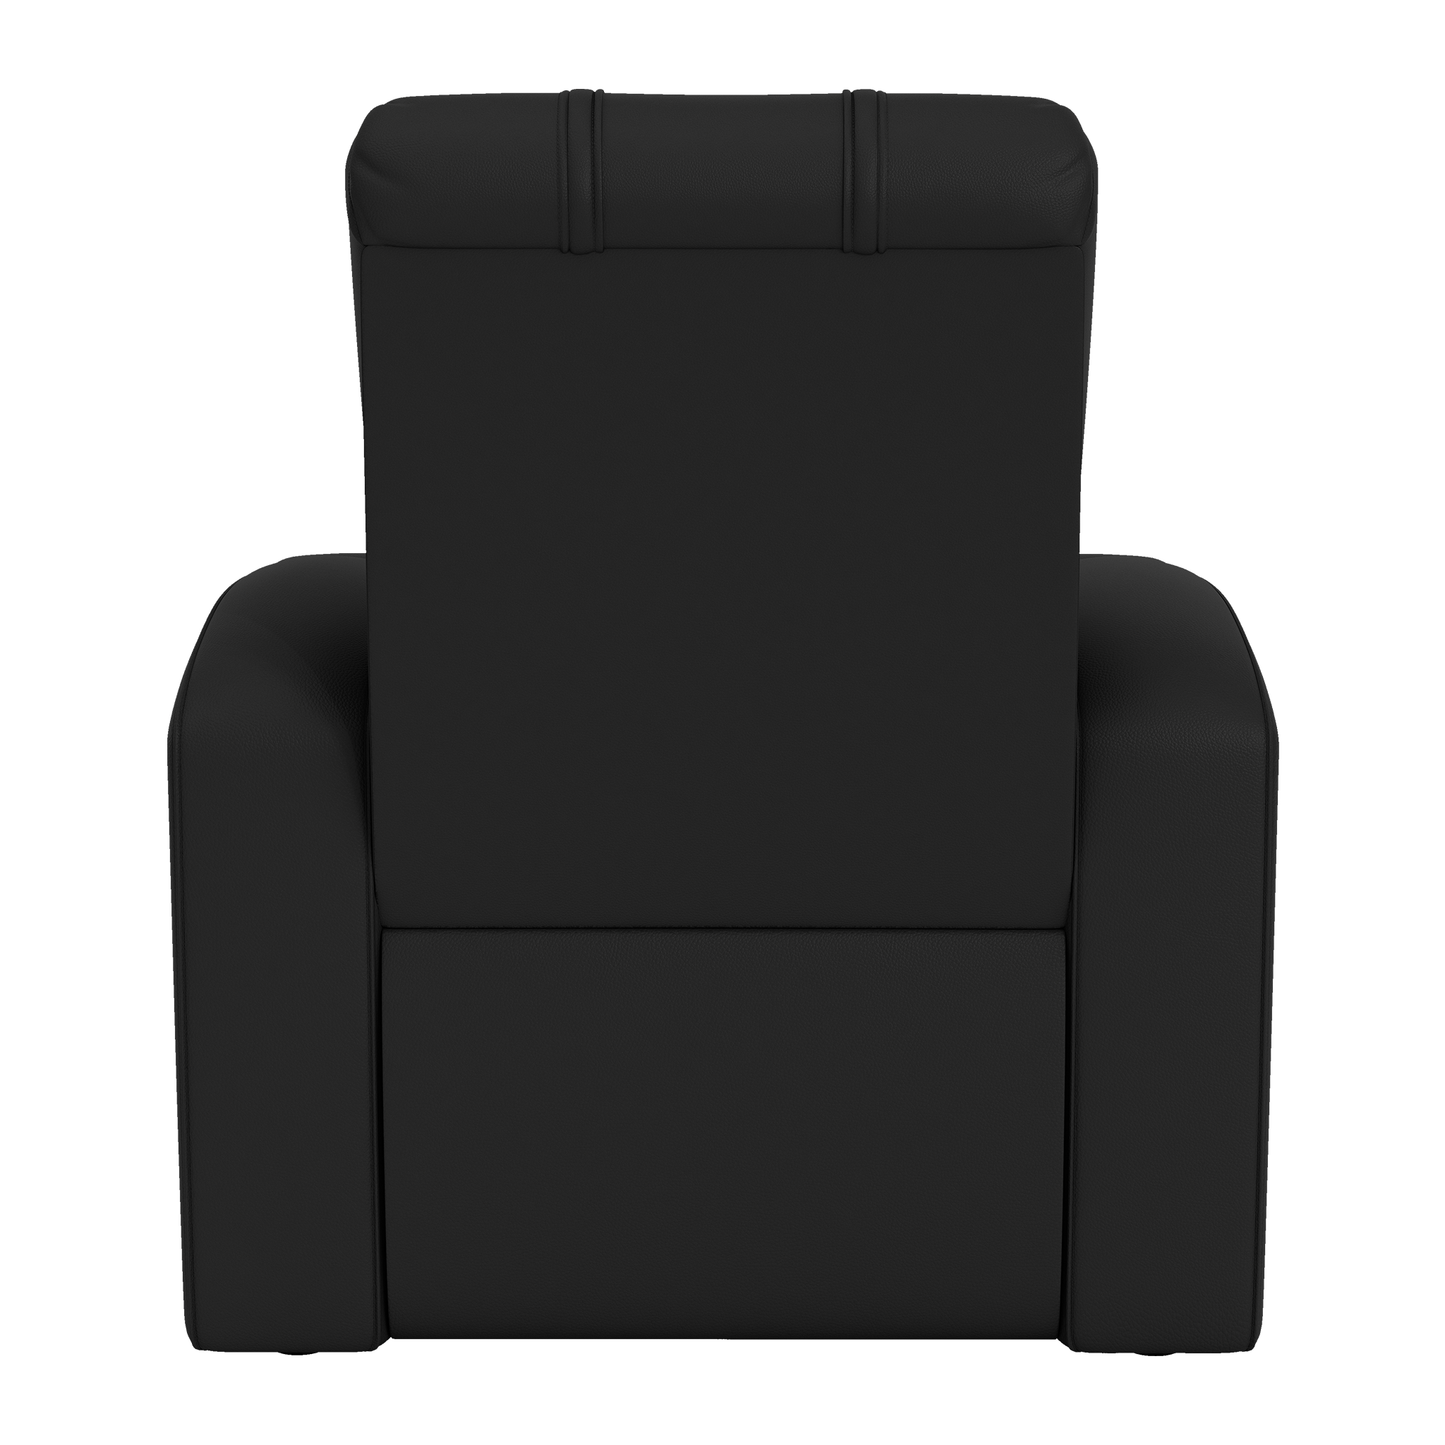 Relax Home Theater Recliner with Los Angeles Lakers 2020 Champions Logo